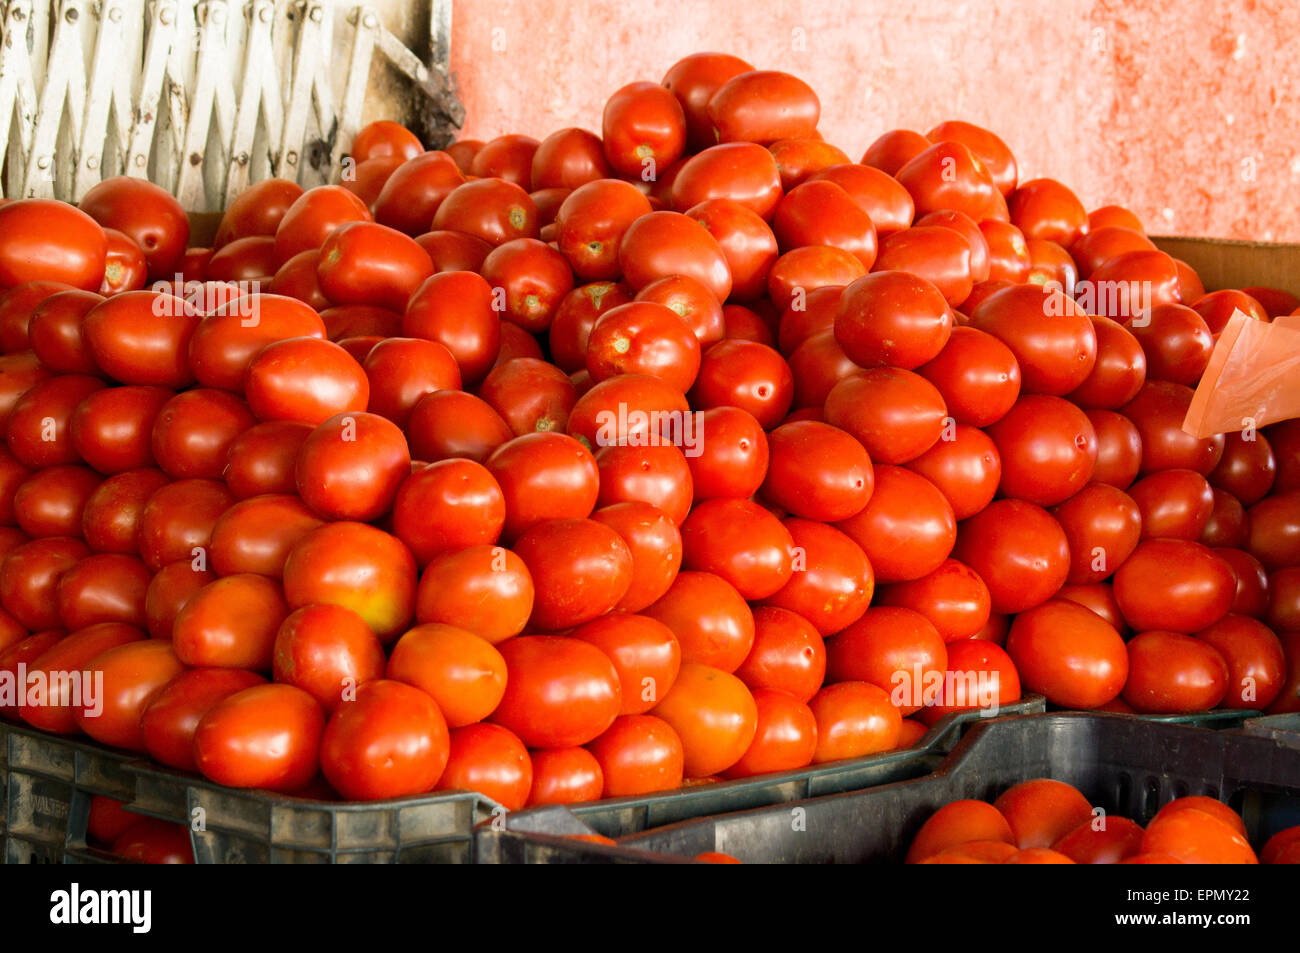 Stack of Red tomatoes  'Tomate guaje' Stock Photo